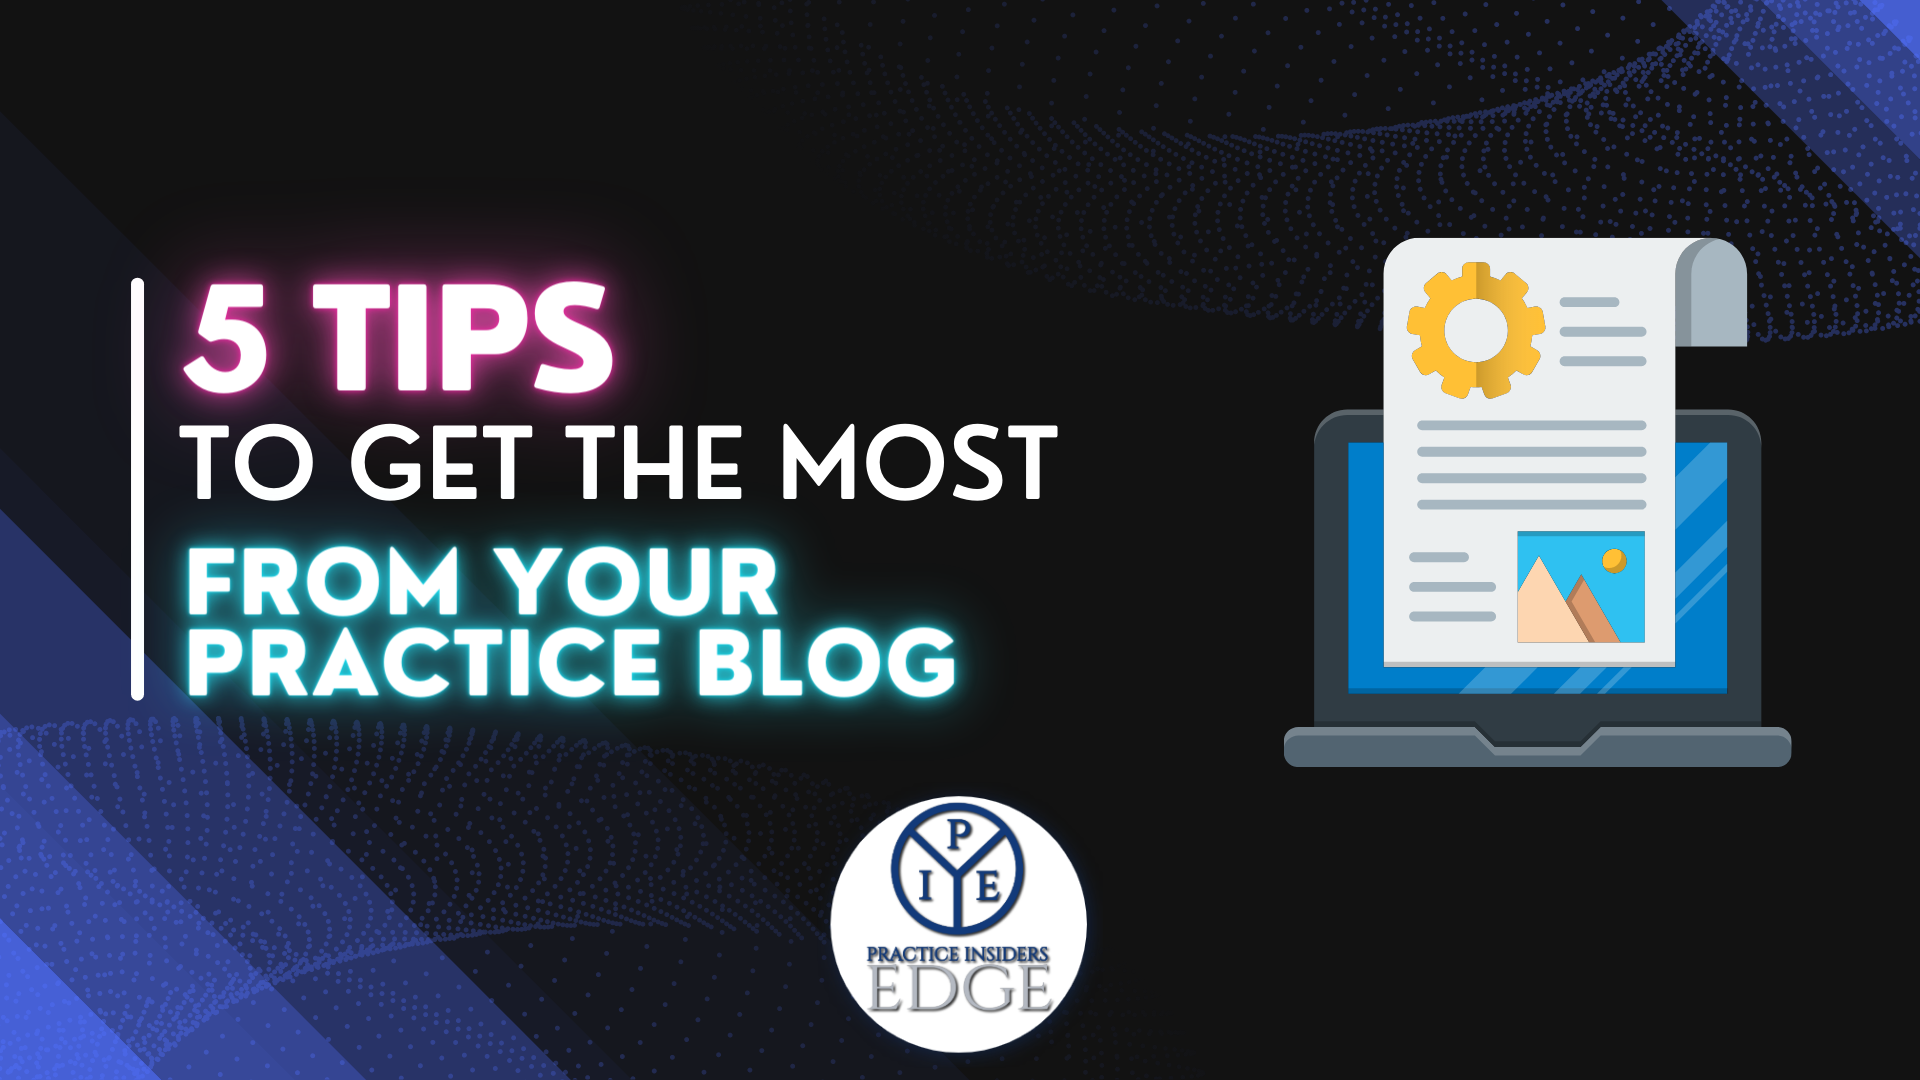 5 Tips to Get the Most from Your Practice Blog